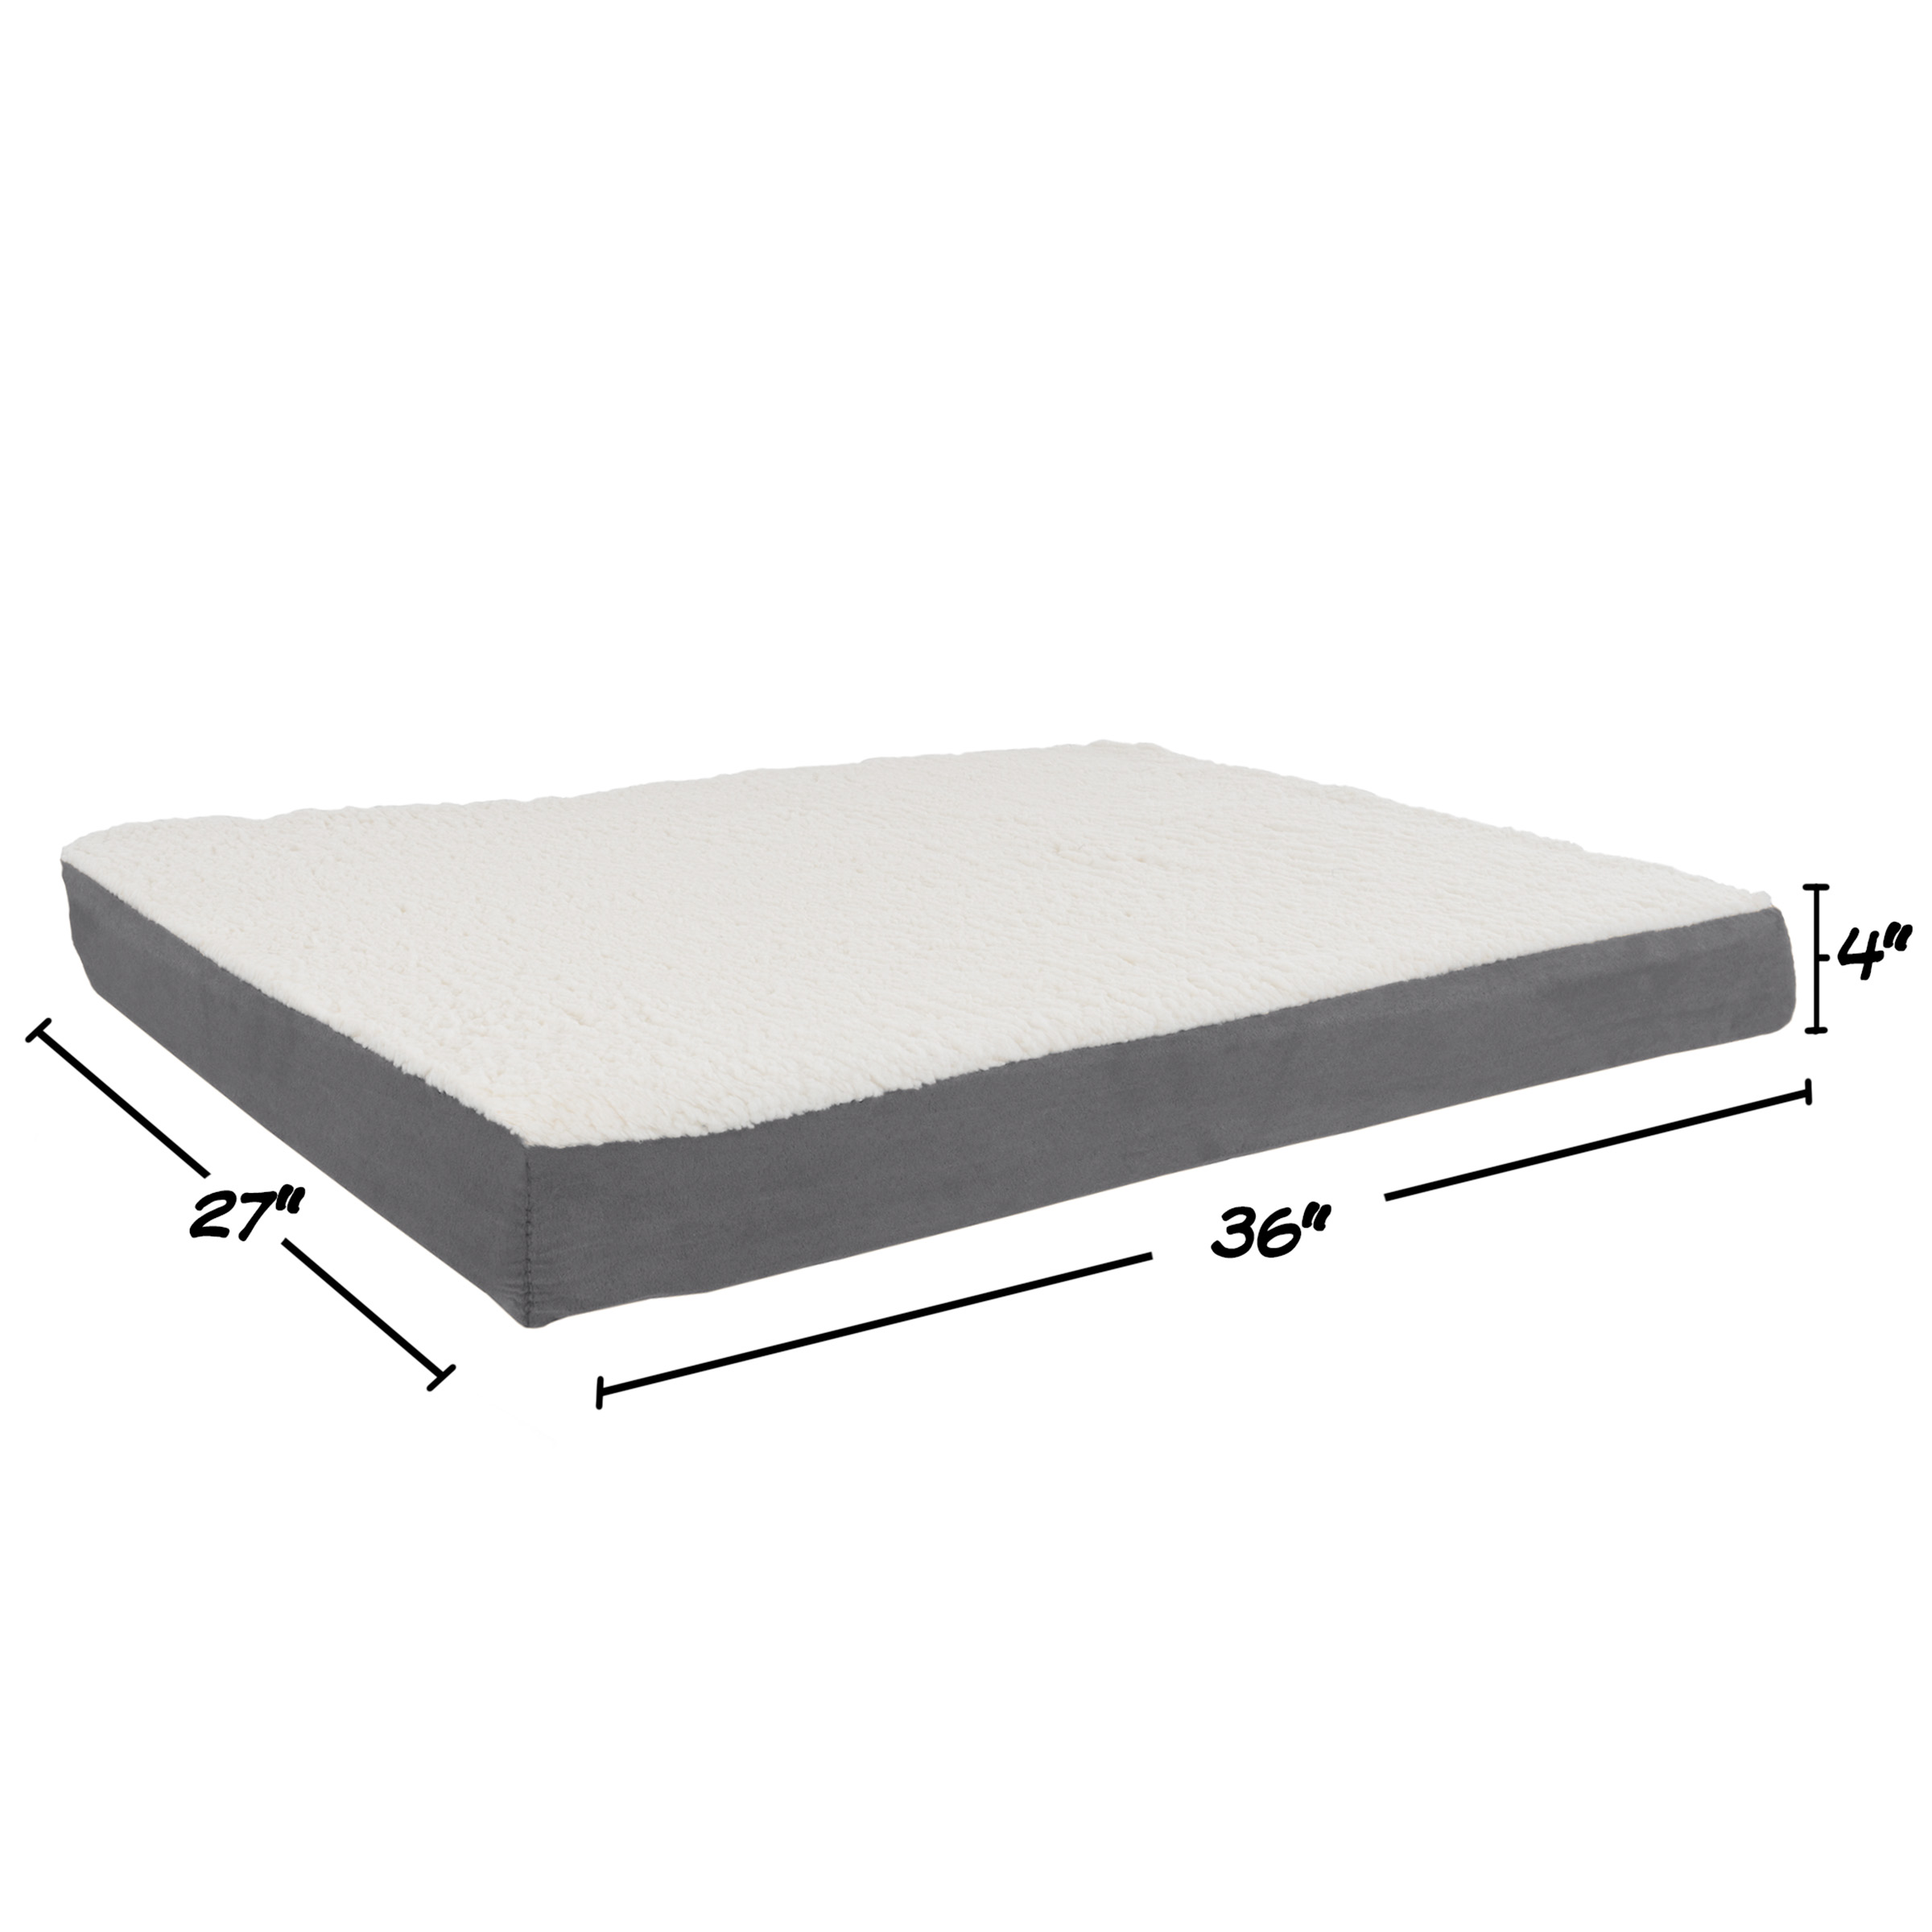 Orthopedic Dog Bed - 2-Layer 36x27-Inch Memory Foam Pet Mattress with Machine-Washable Sherpa Cover for Large Dogs up to 65lbs by PETMAKER (Gray) - image 2 of 7